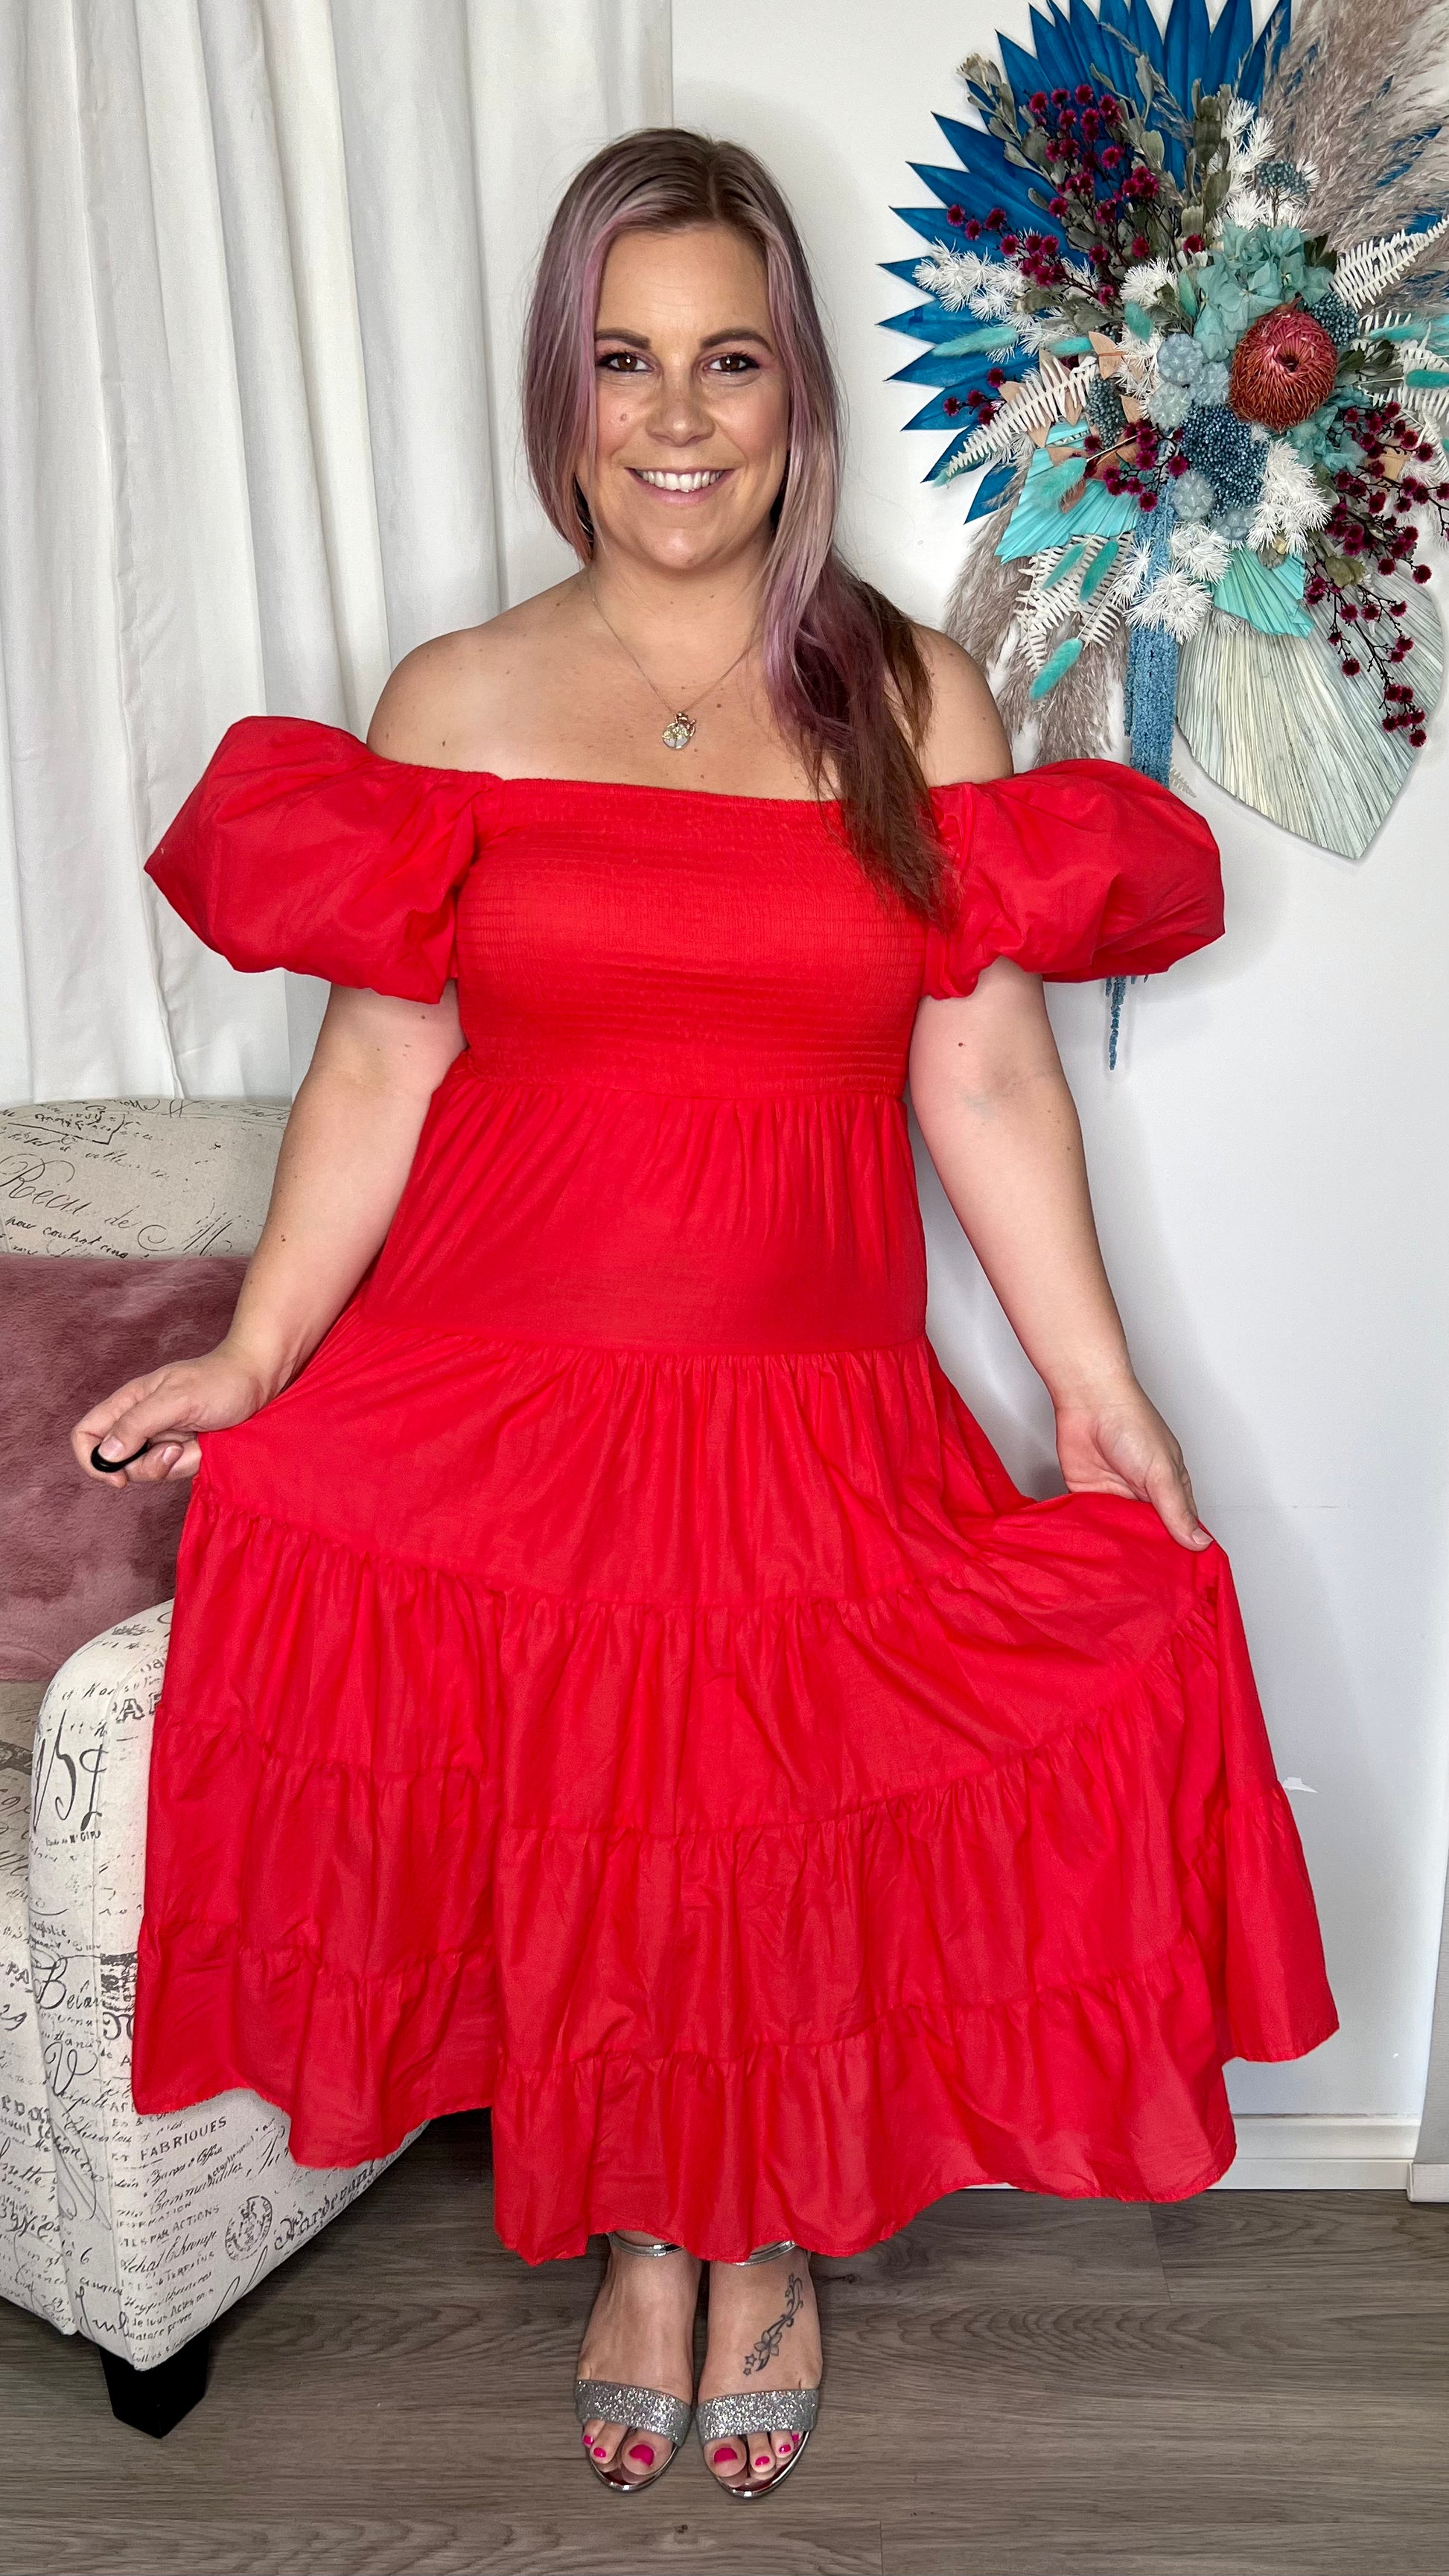 Charlotte Dress: The Charlotte Dress is made to party. It features a shirred bust, puff sleeves and a tiered skirt

Shirred bust - can pull down to breastfeed
Puff sleeves can be wor - Ciao Bella Dresses 